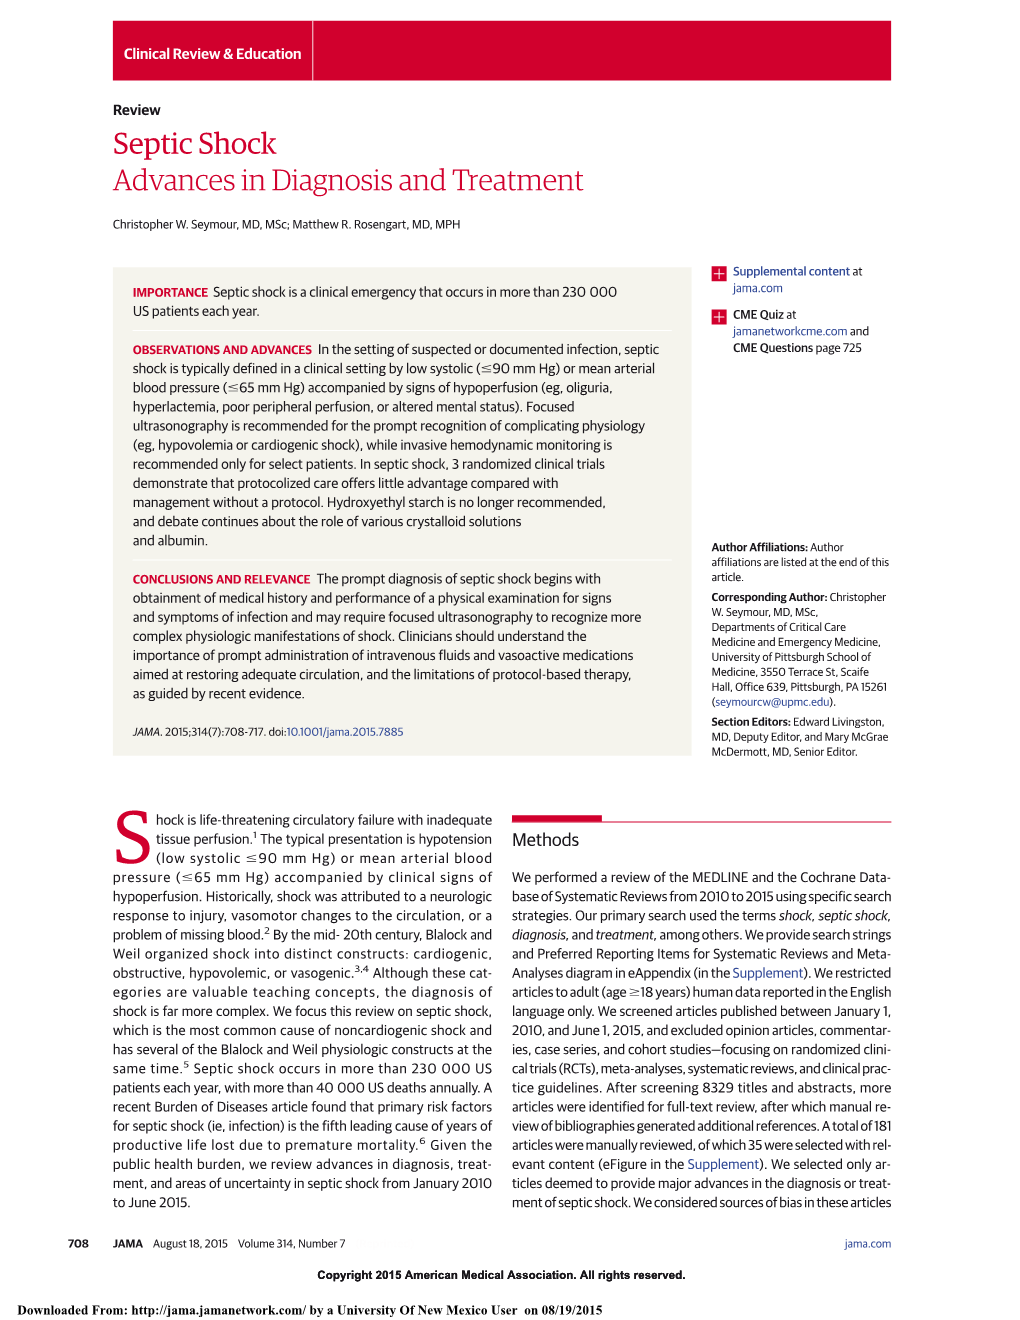 Septic Shock Advances in Diagnosis and Treatment